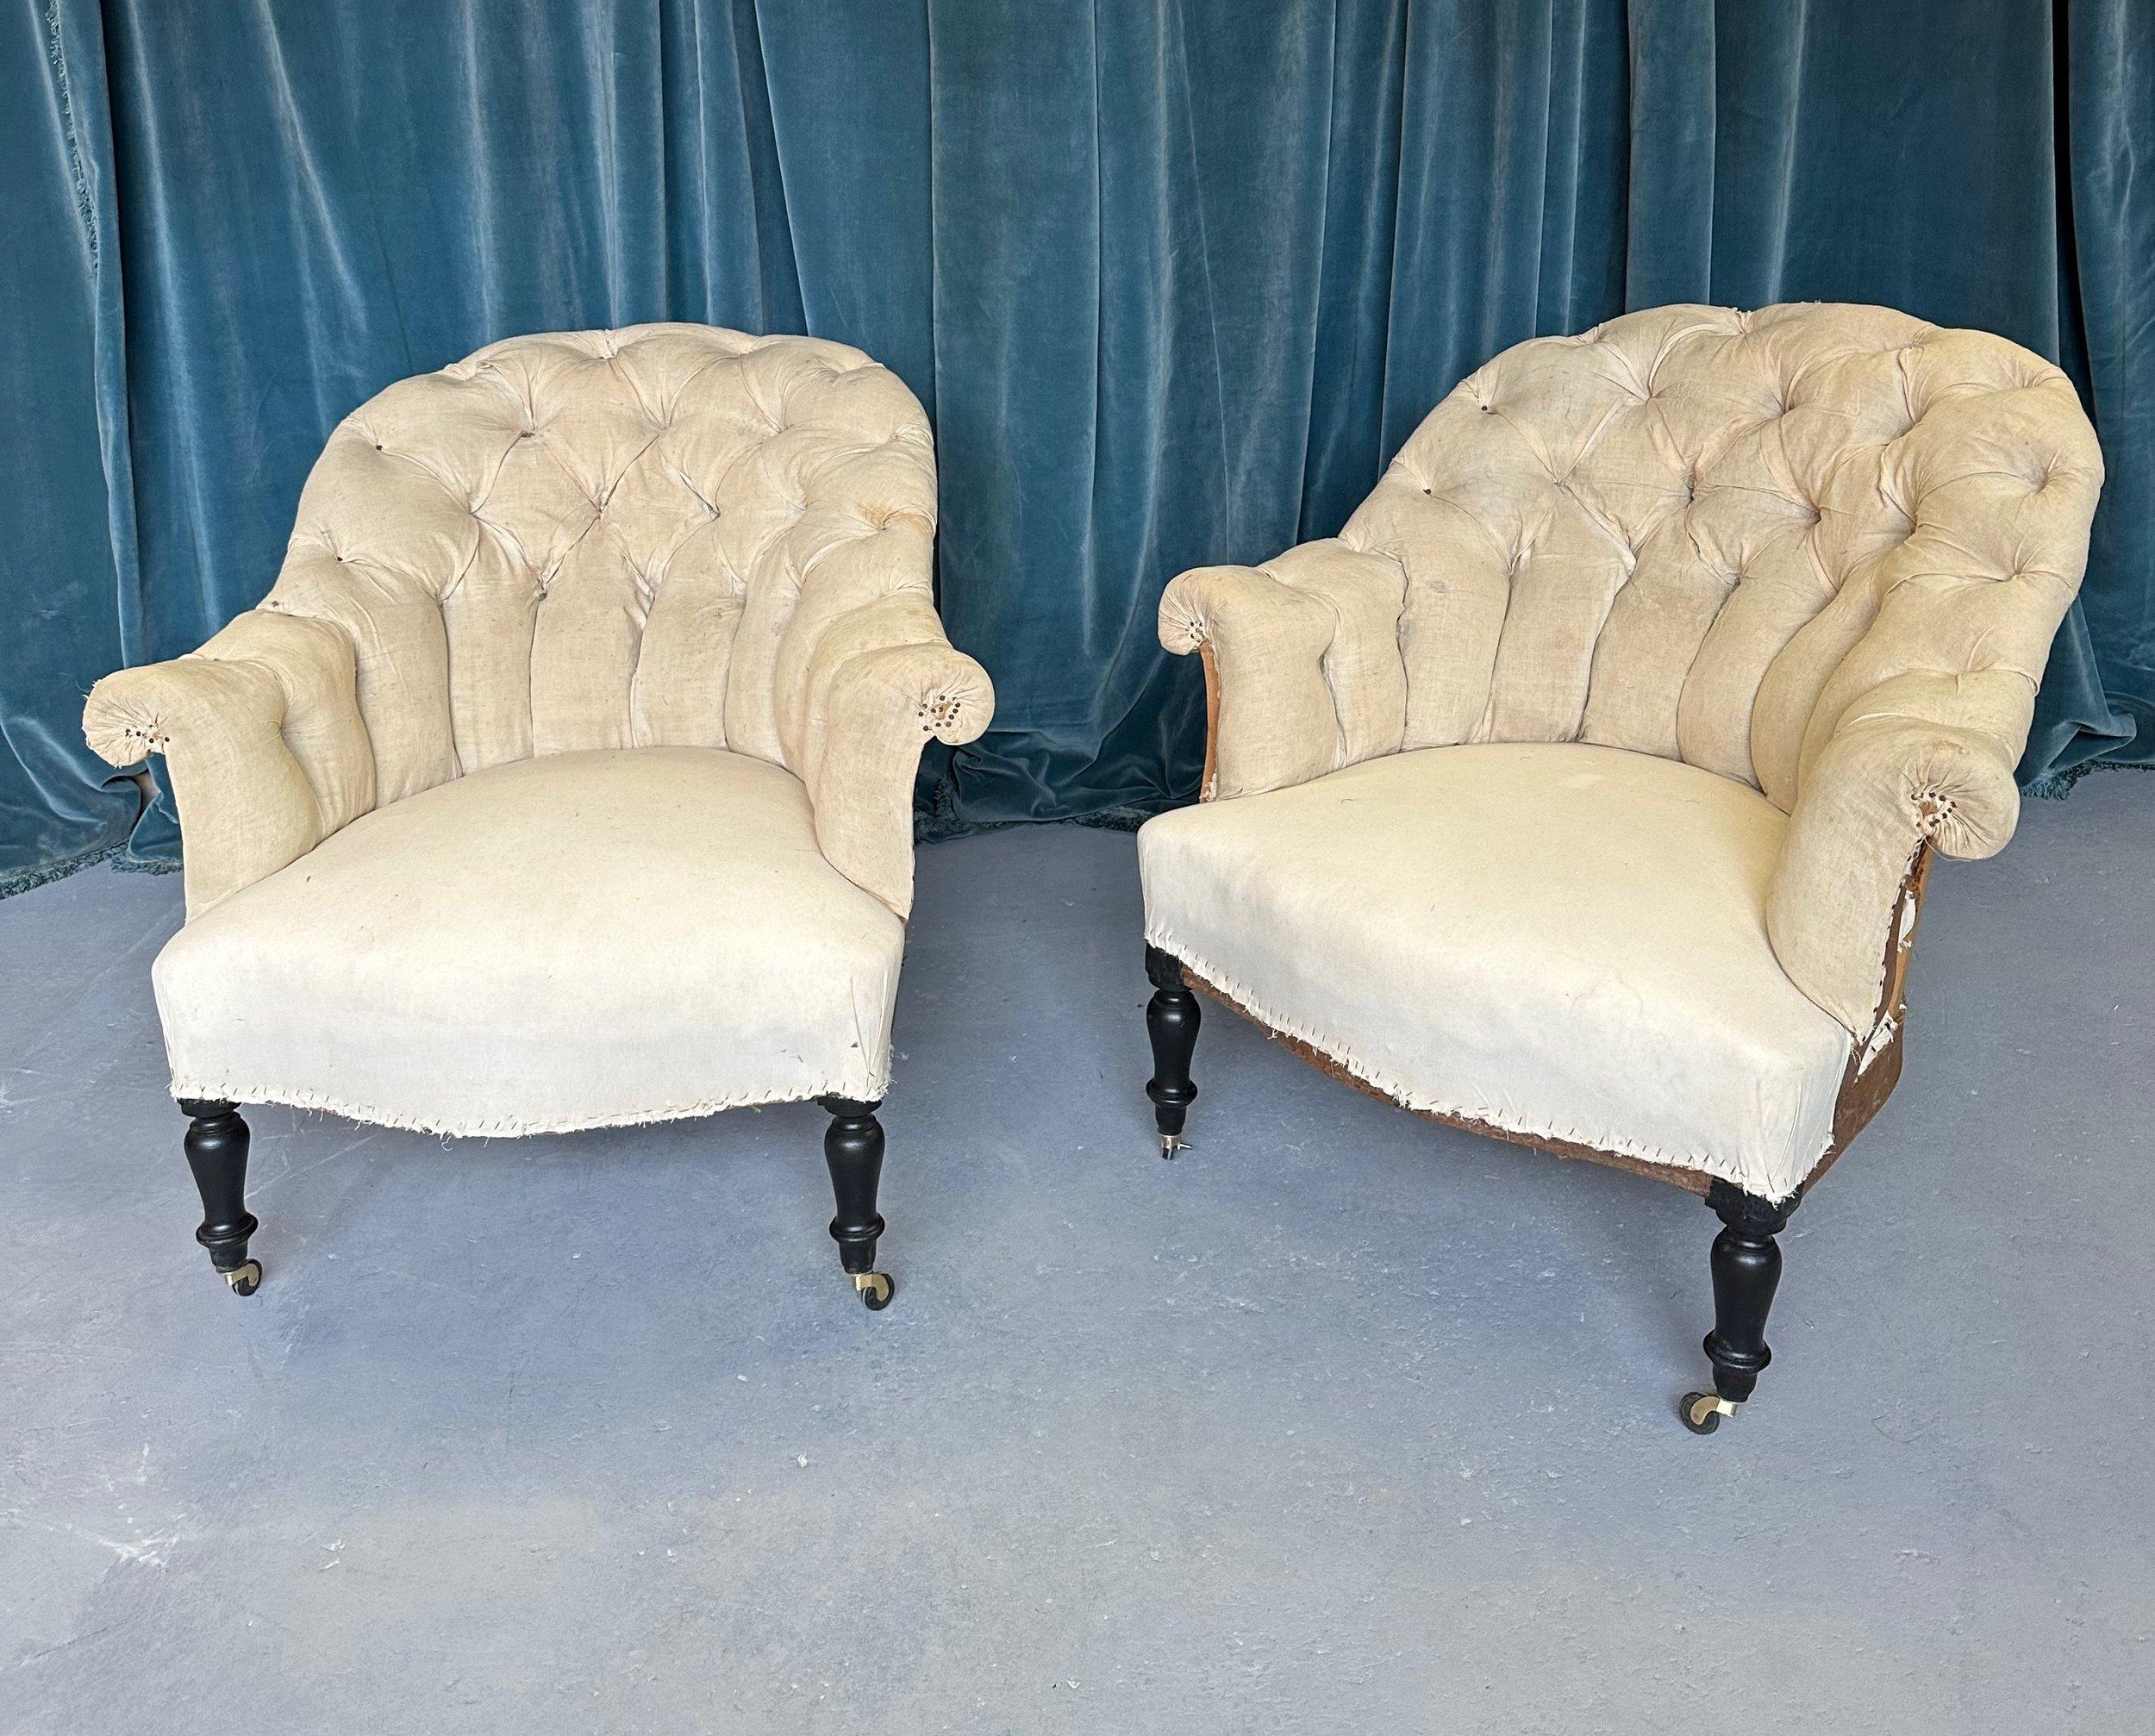 A handsome pair of French 19th century armchairs with diamond tufted backs and scrolled arms. This pair of armchairs from the Napoleon III period captures the intricate details and romantic beauty that is typical of this period in French design. The